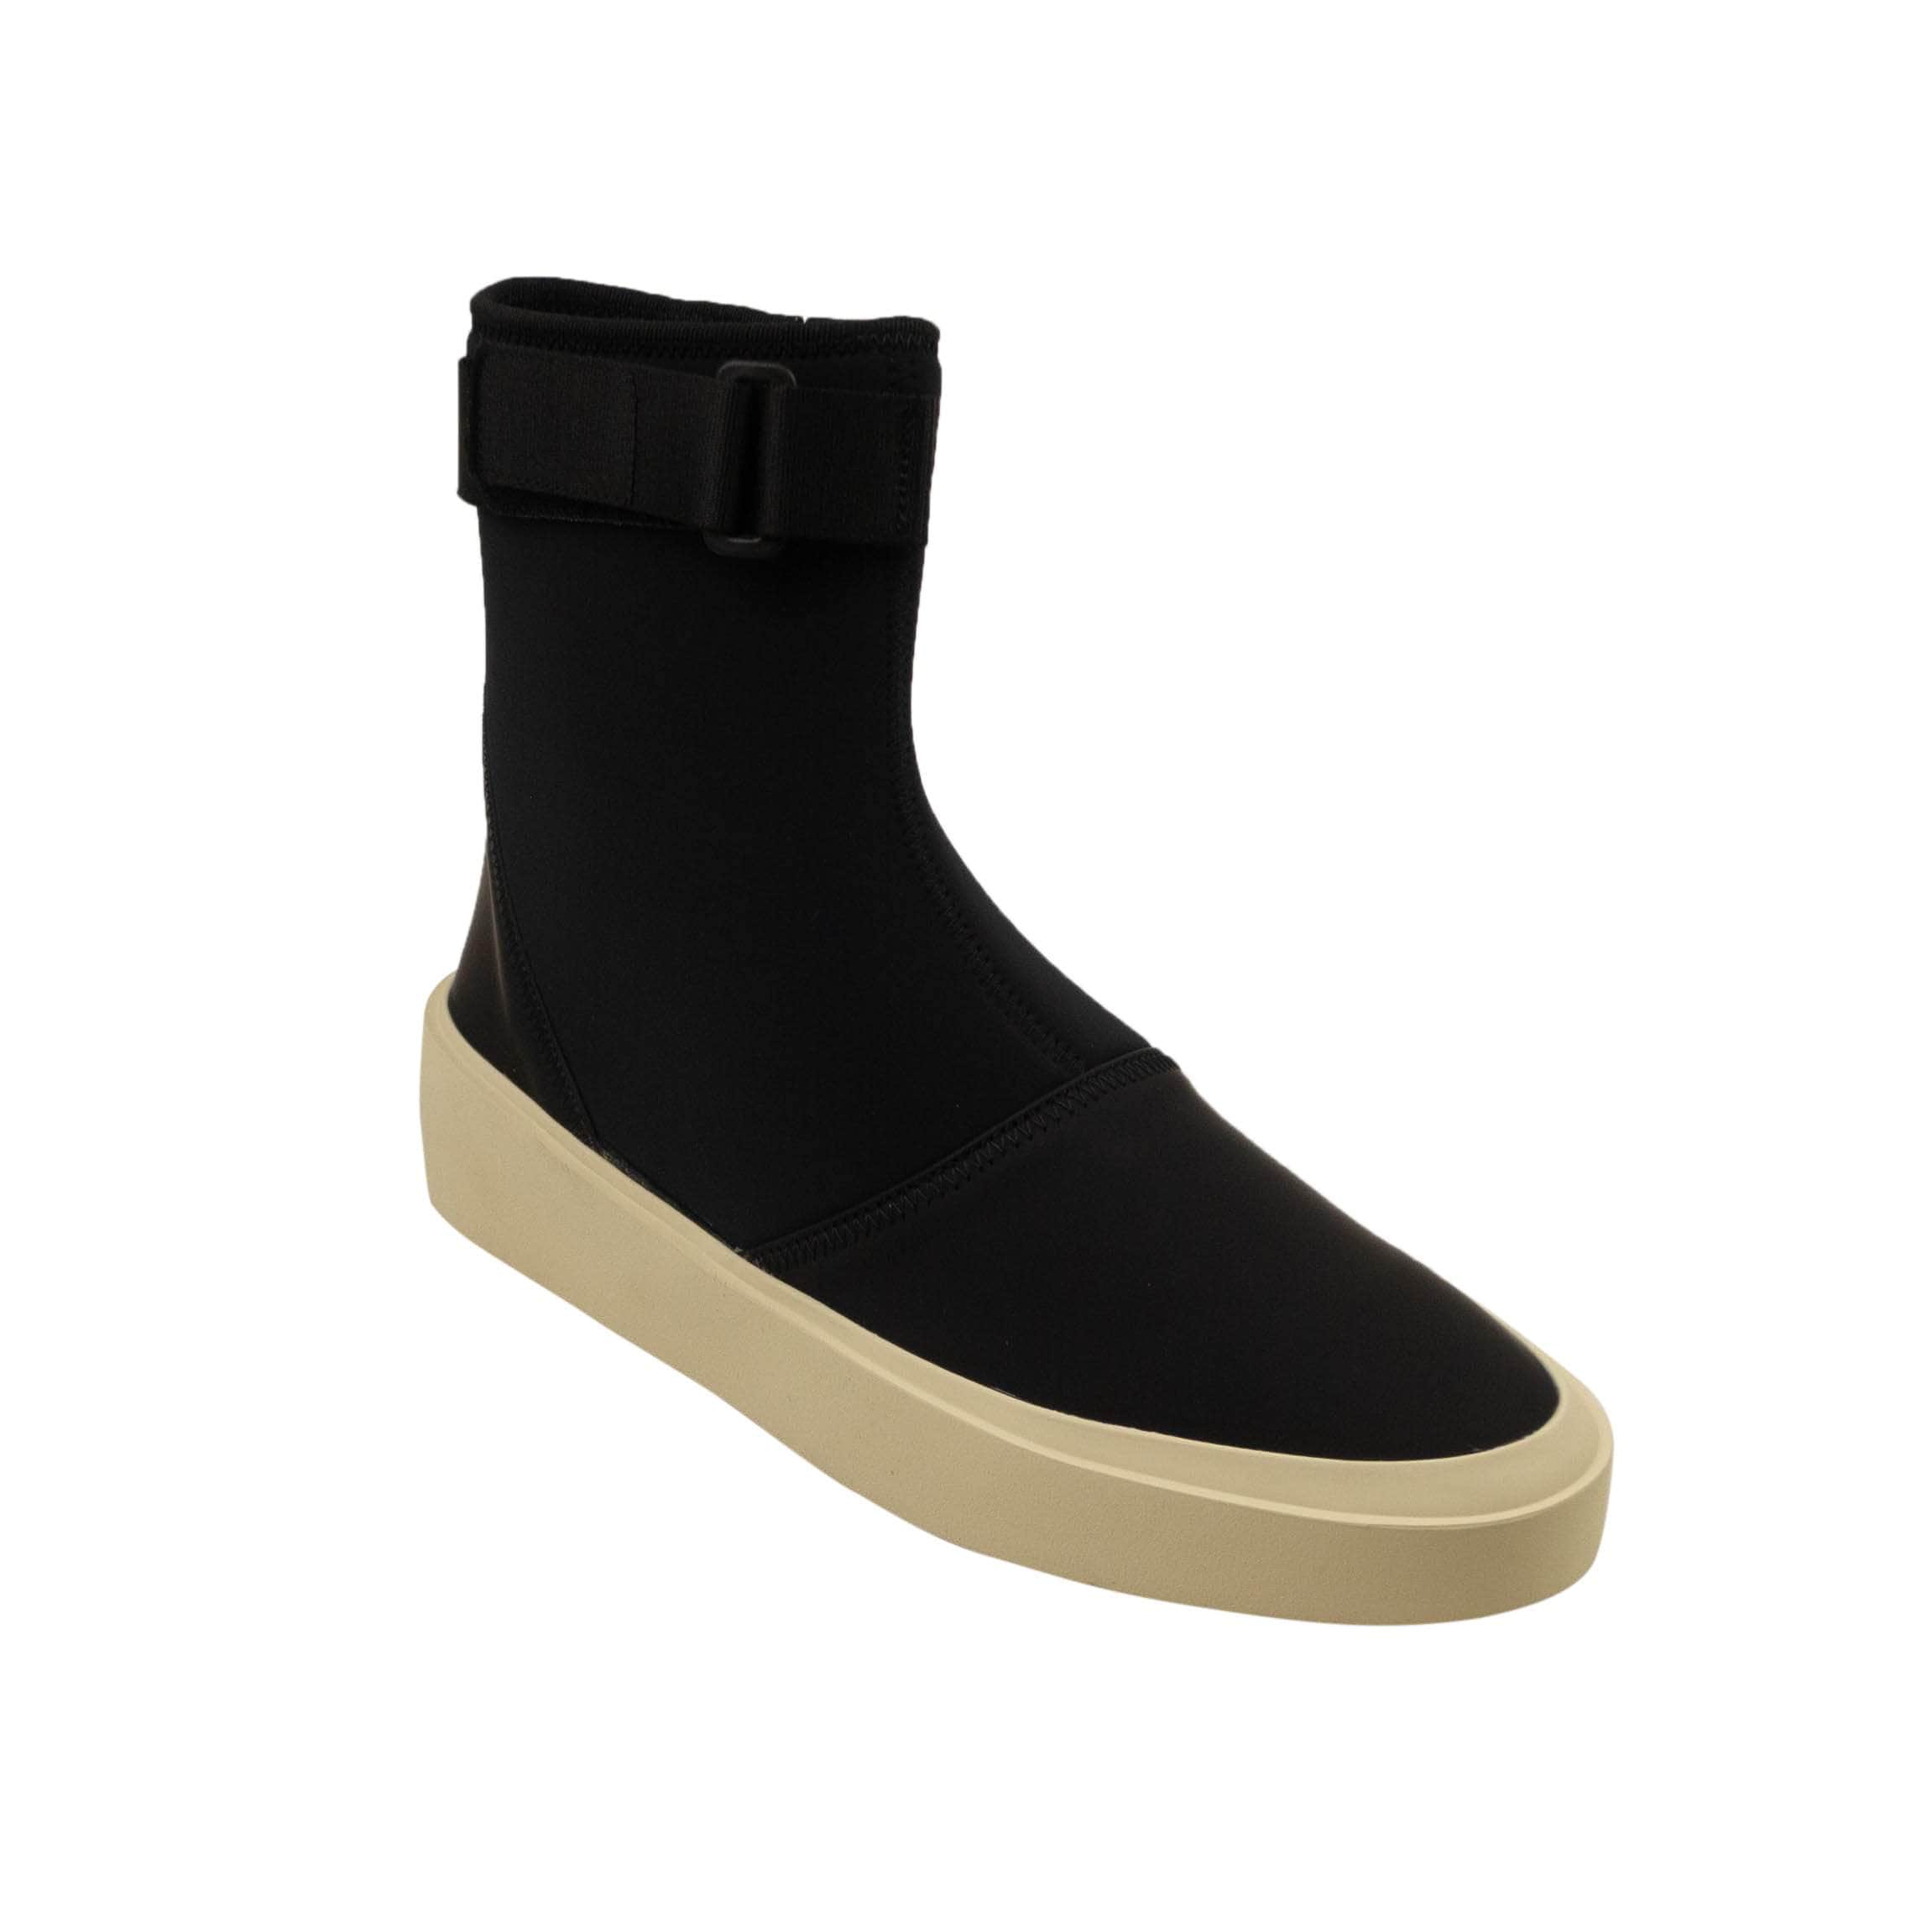 Fear Of God 500-750, channelenable-all, chicmi, couponcollection, fear-of-god, gender-mens, main-shoes, mens-ankle-boots, mens-shoes, size-39, size-41, size-42 Black Scuba Ankle Boots